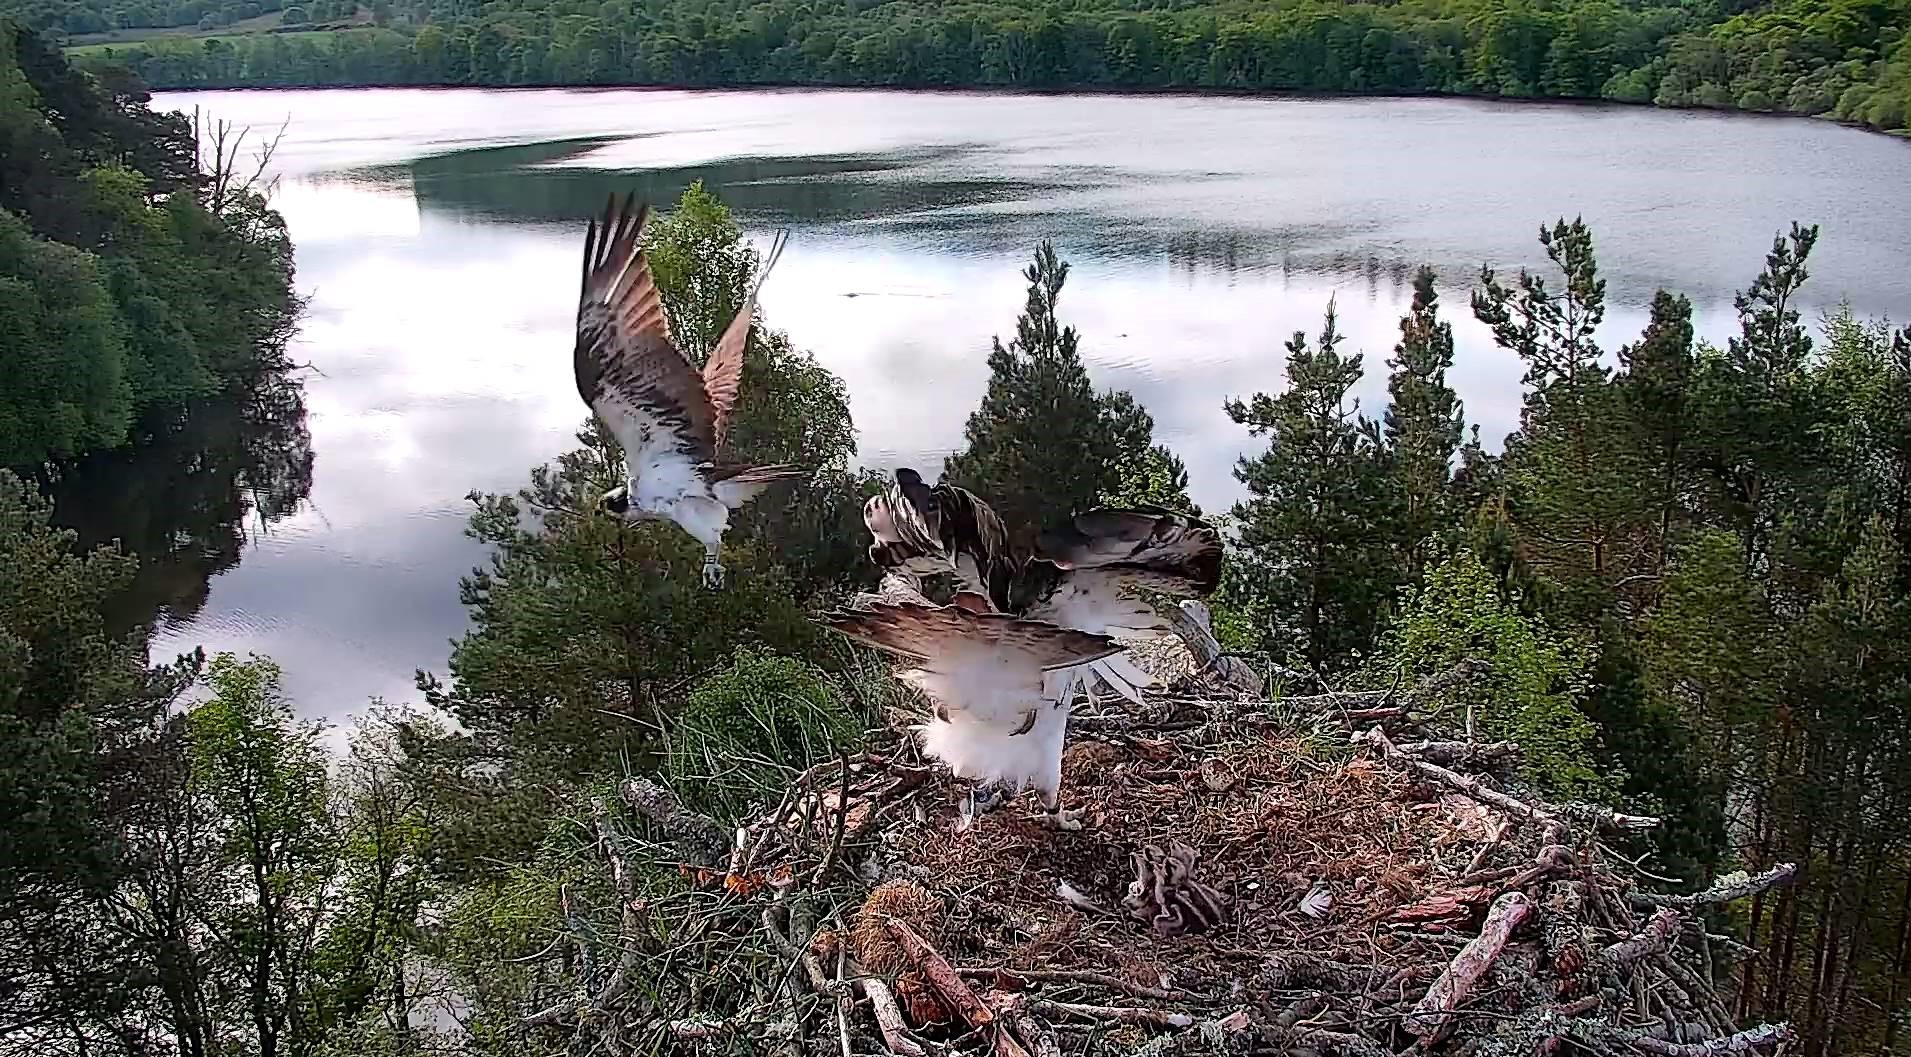 A Special Guest on the Nest – Intruding Osprey ‘Rothiemurchus’ visits Loch of the Lowes